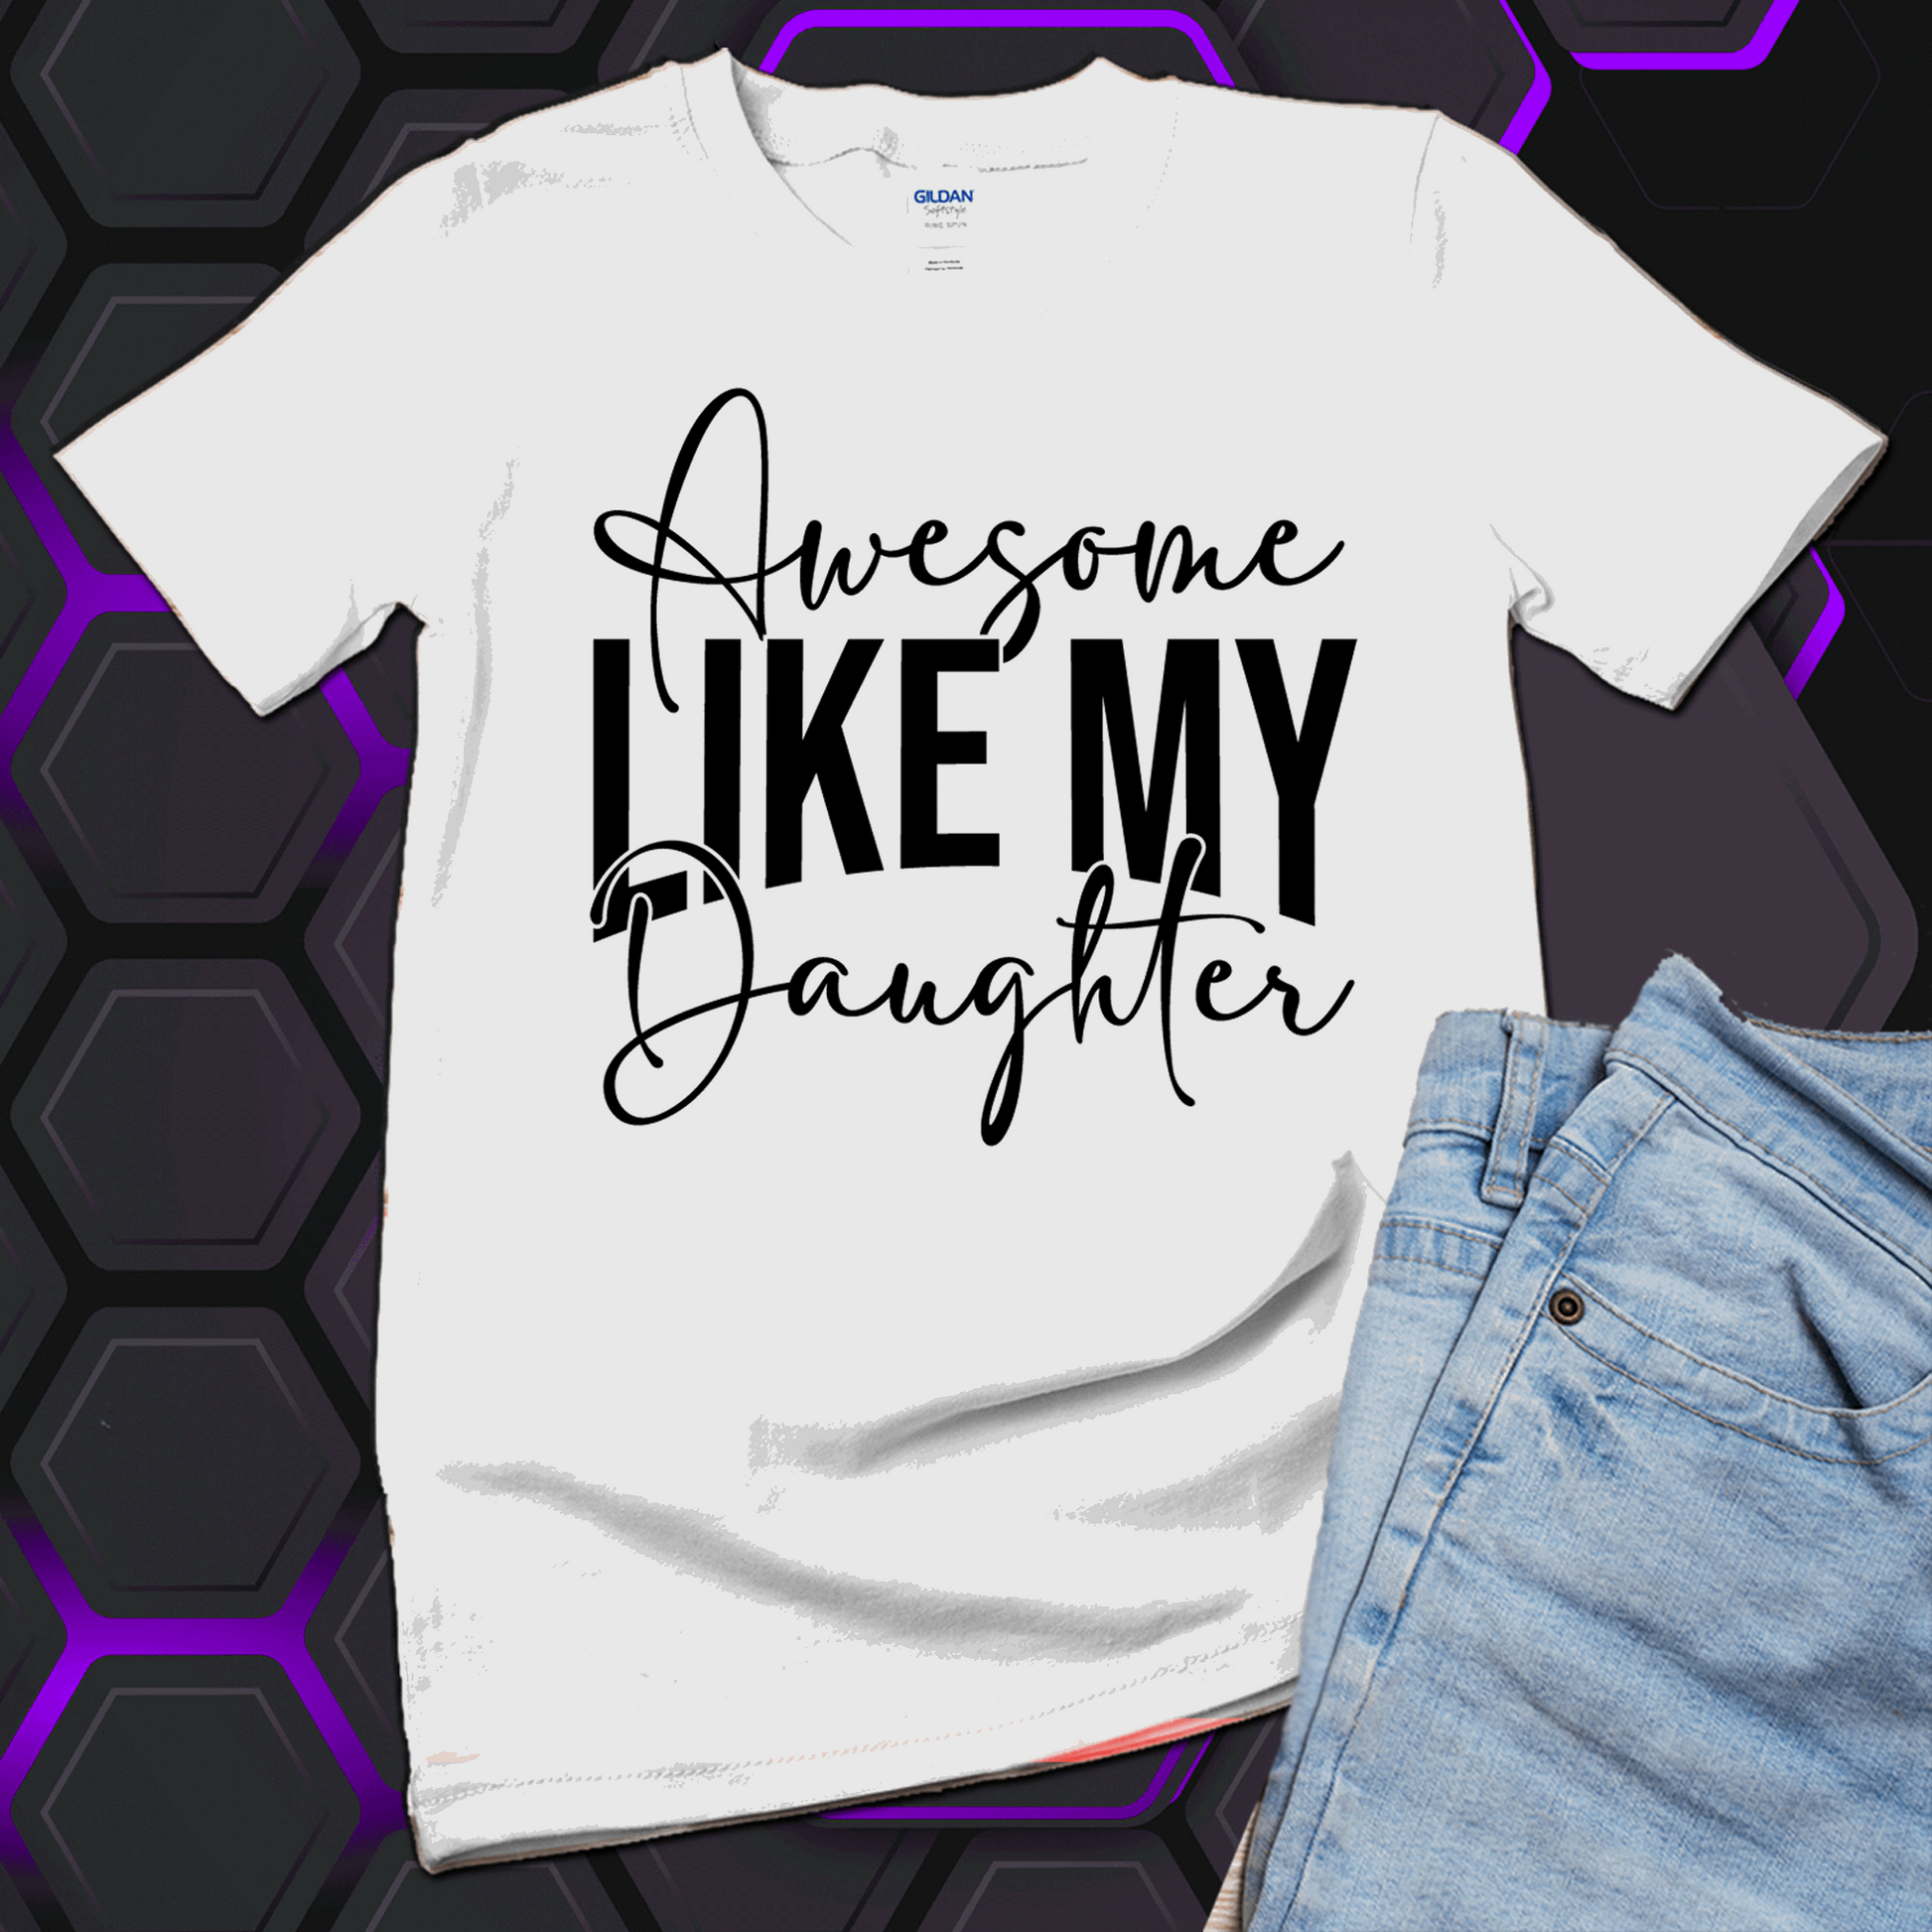 Awesome like my daughter shirt, awesome like my daughter Hoodie, Gift for Father - Wilson Design Group